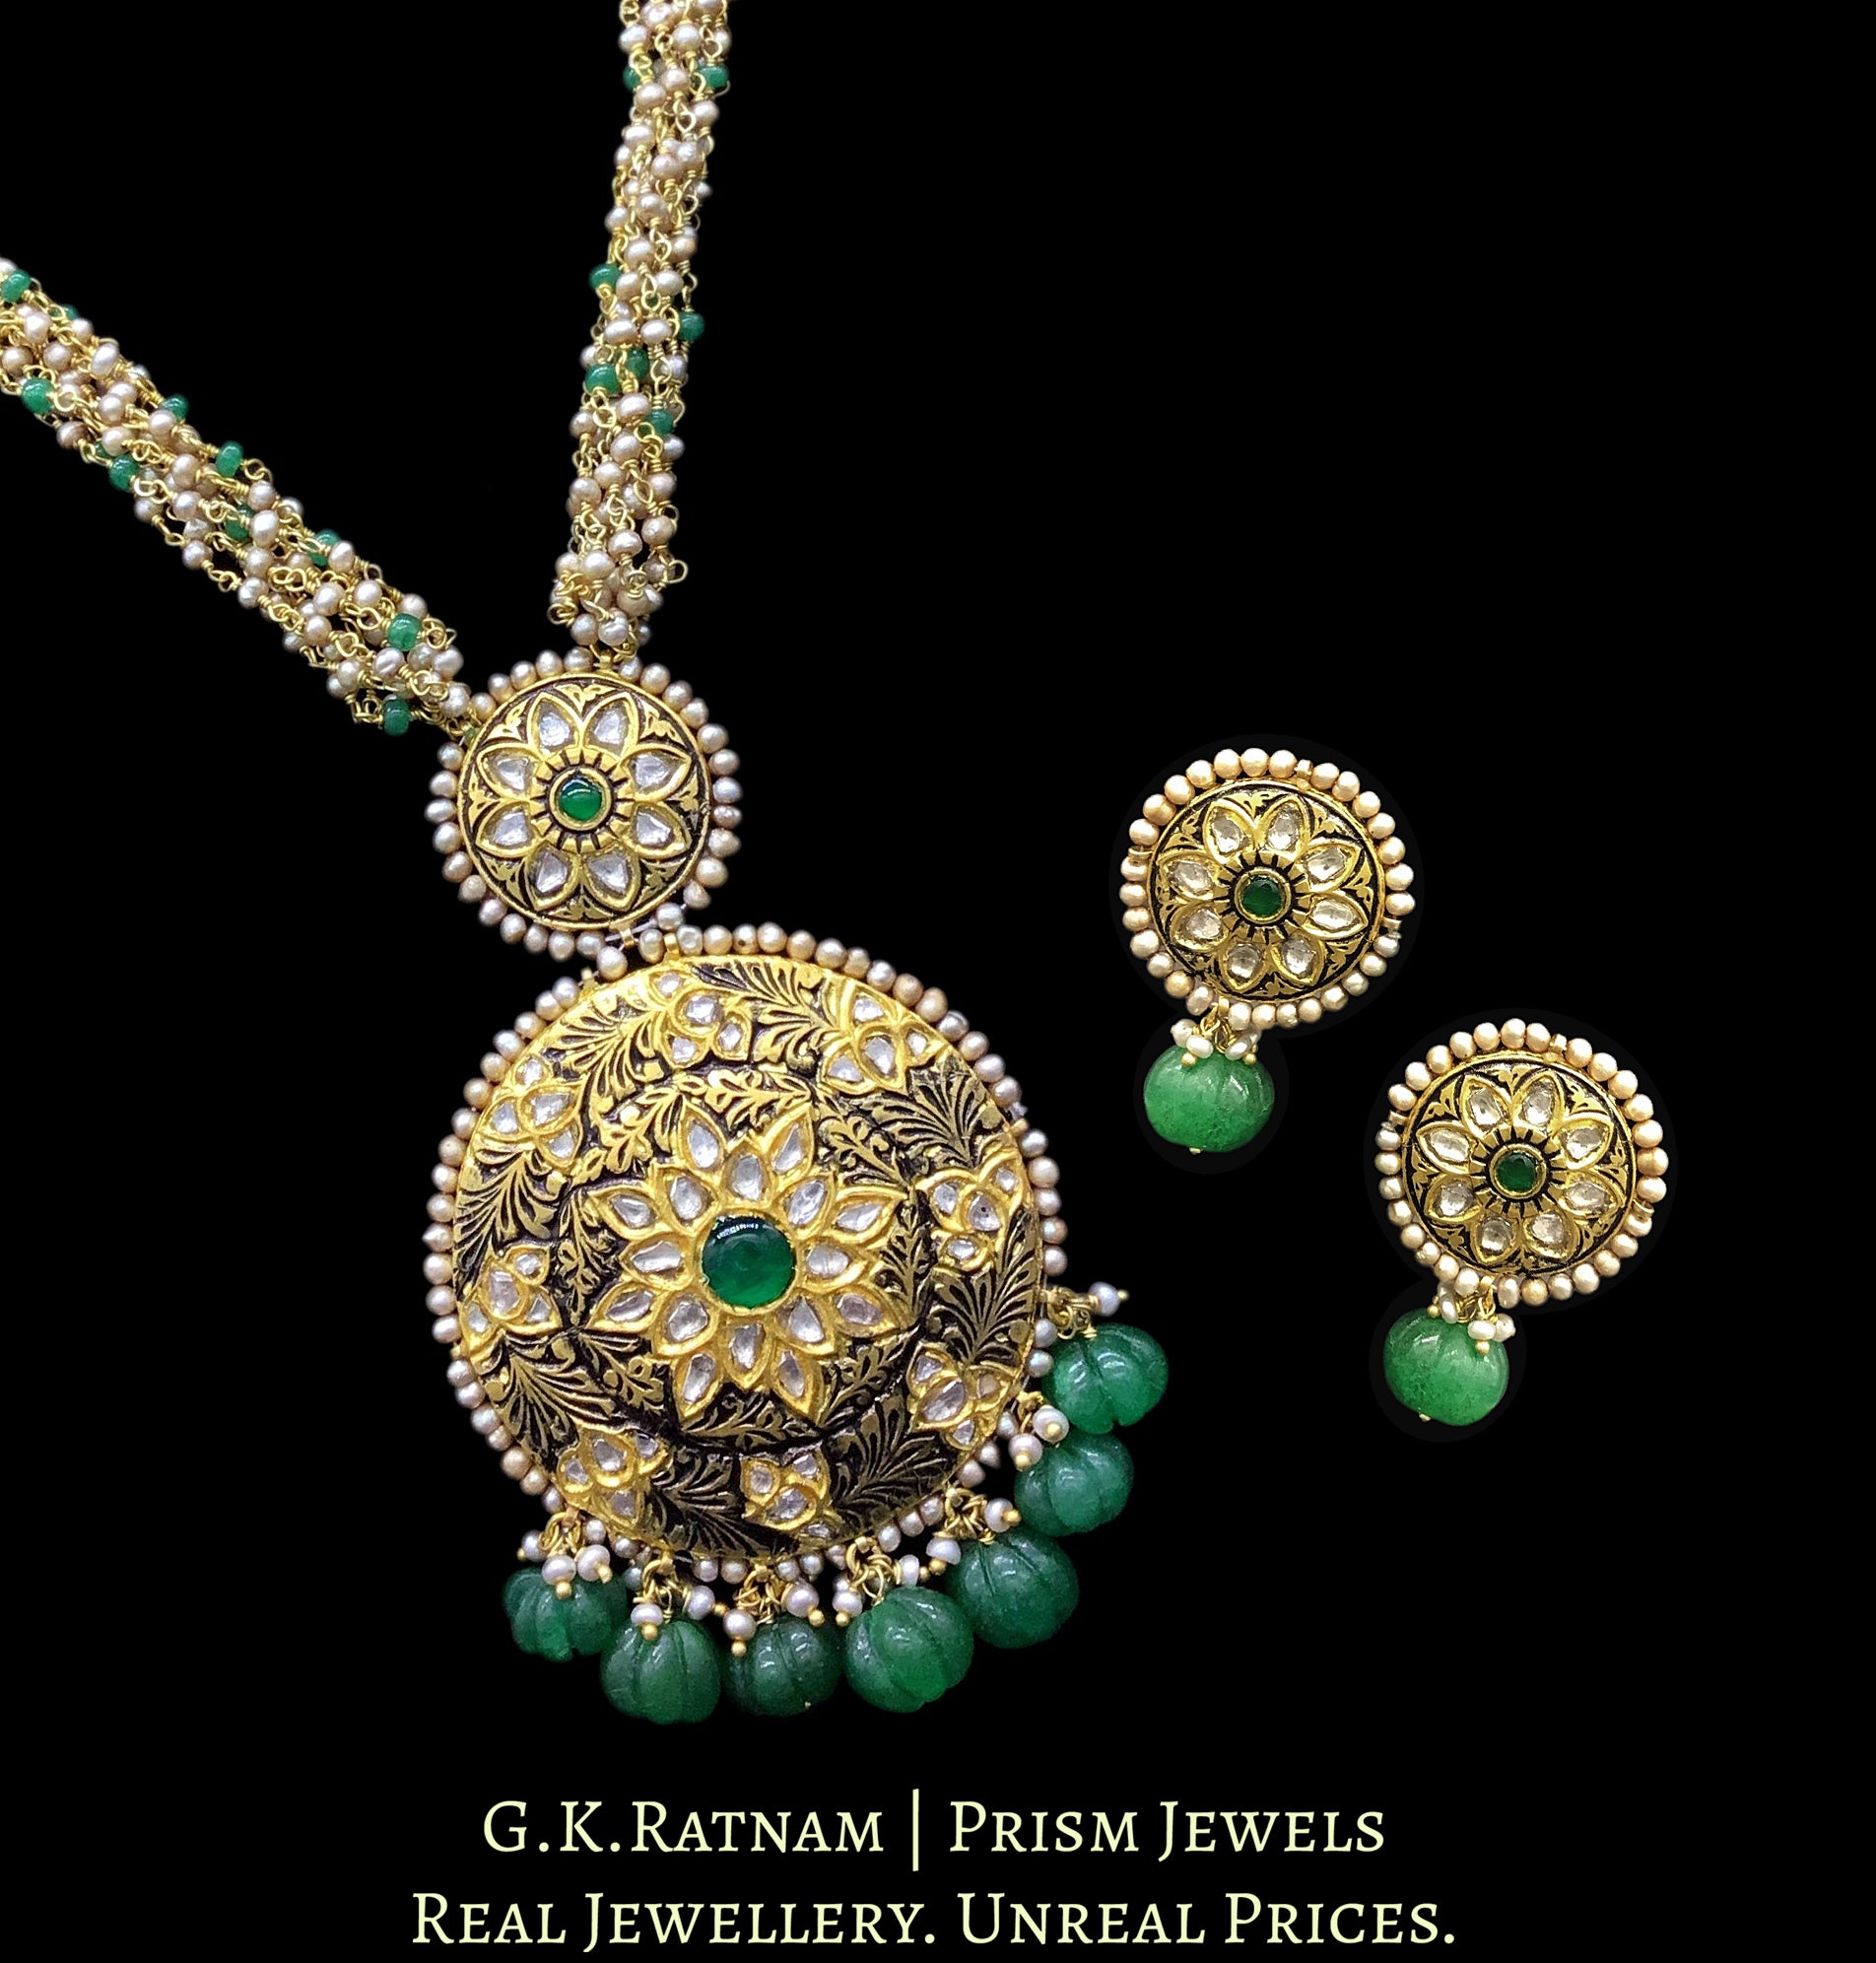 23k Gold and Diamond Polki round hybrid Pendant Set with antiqued freshwater pearls and green beryls